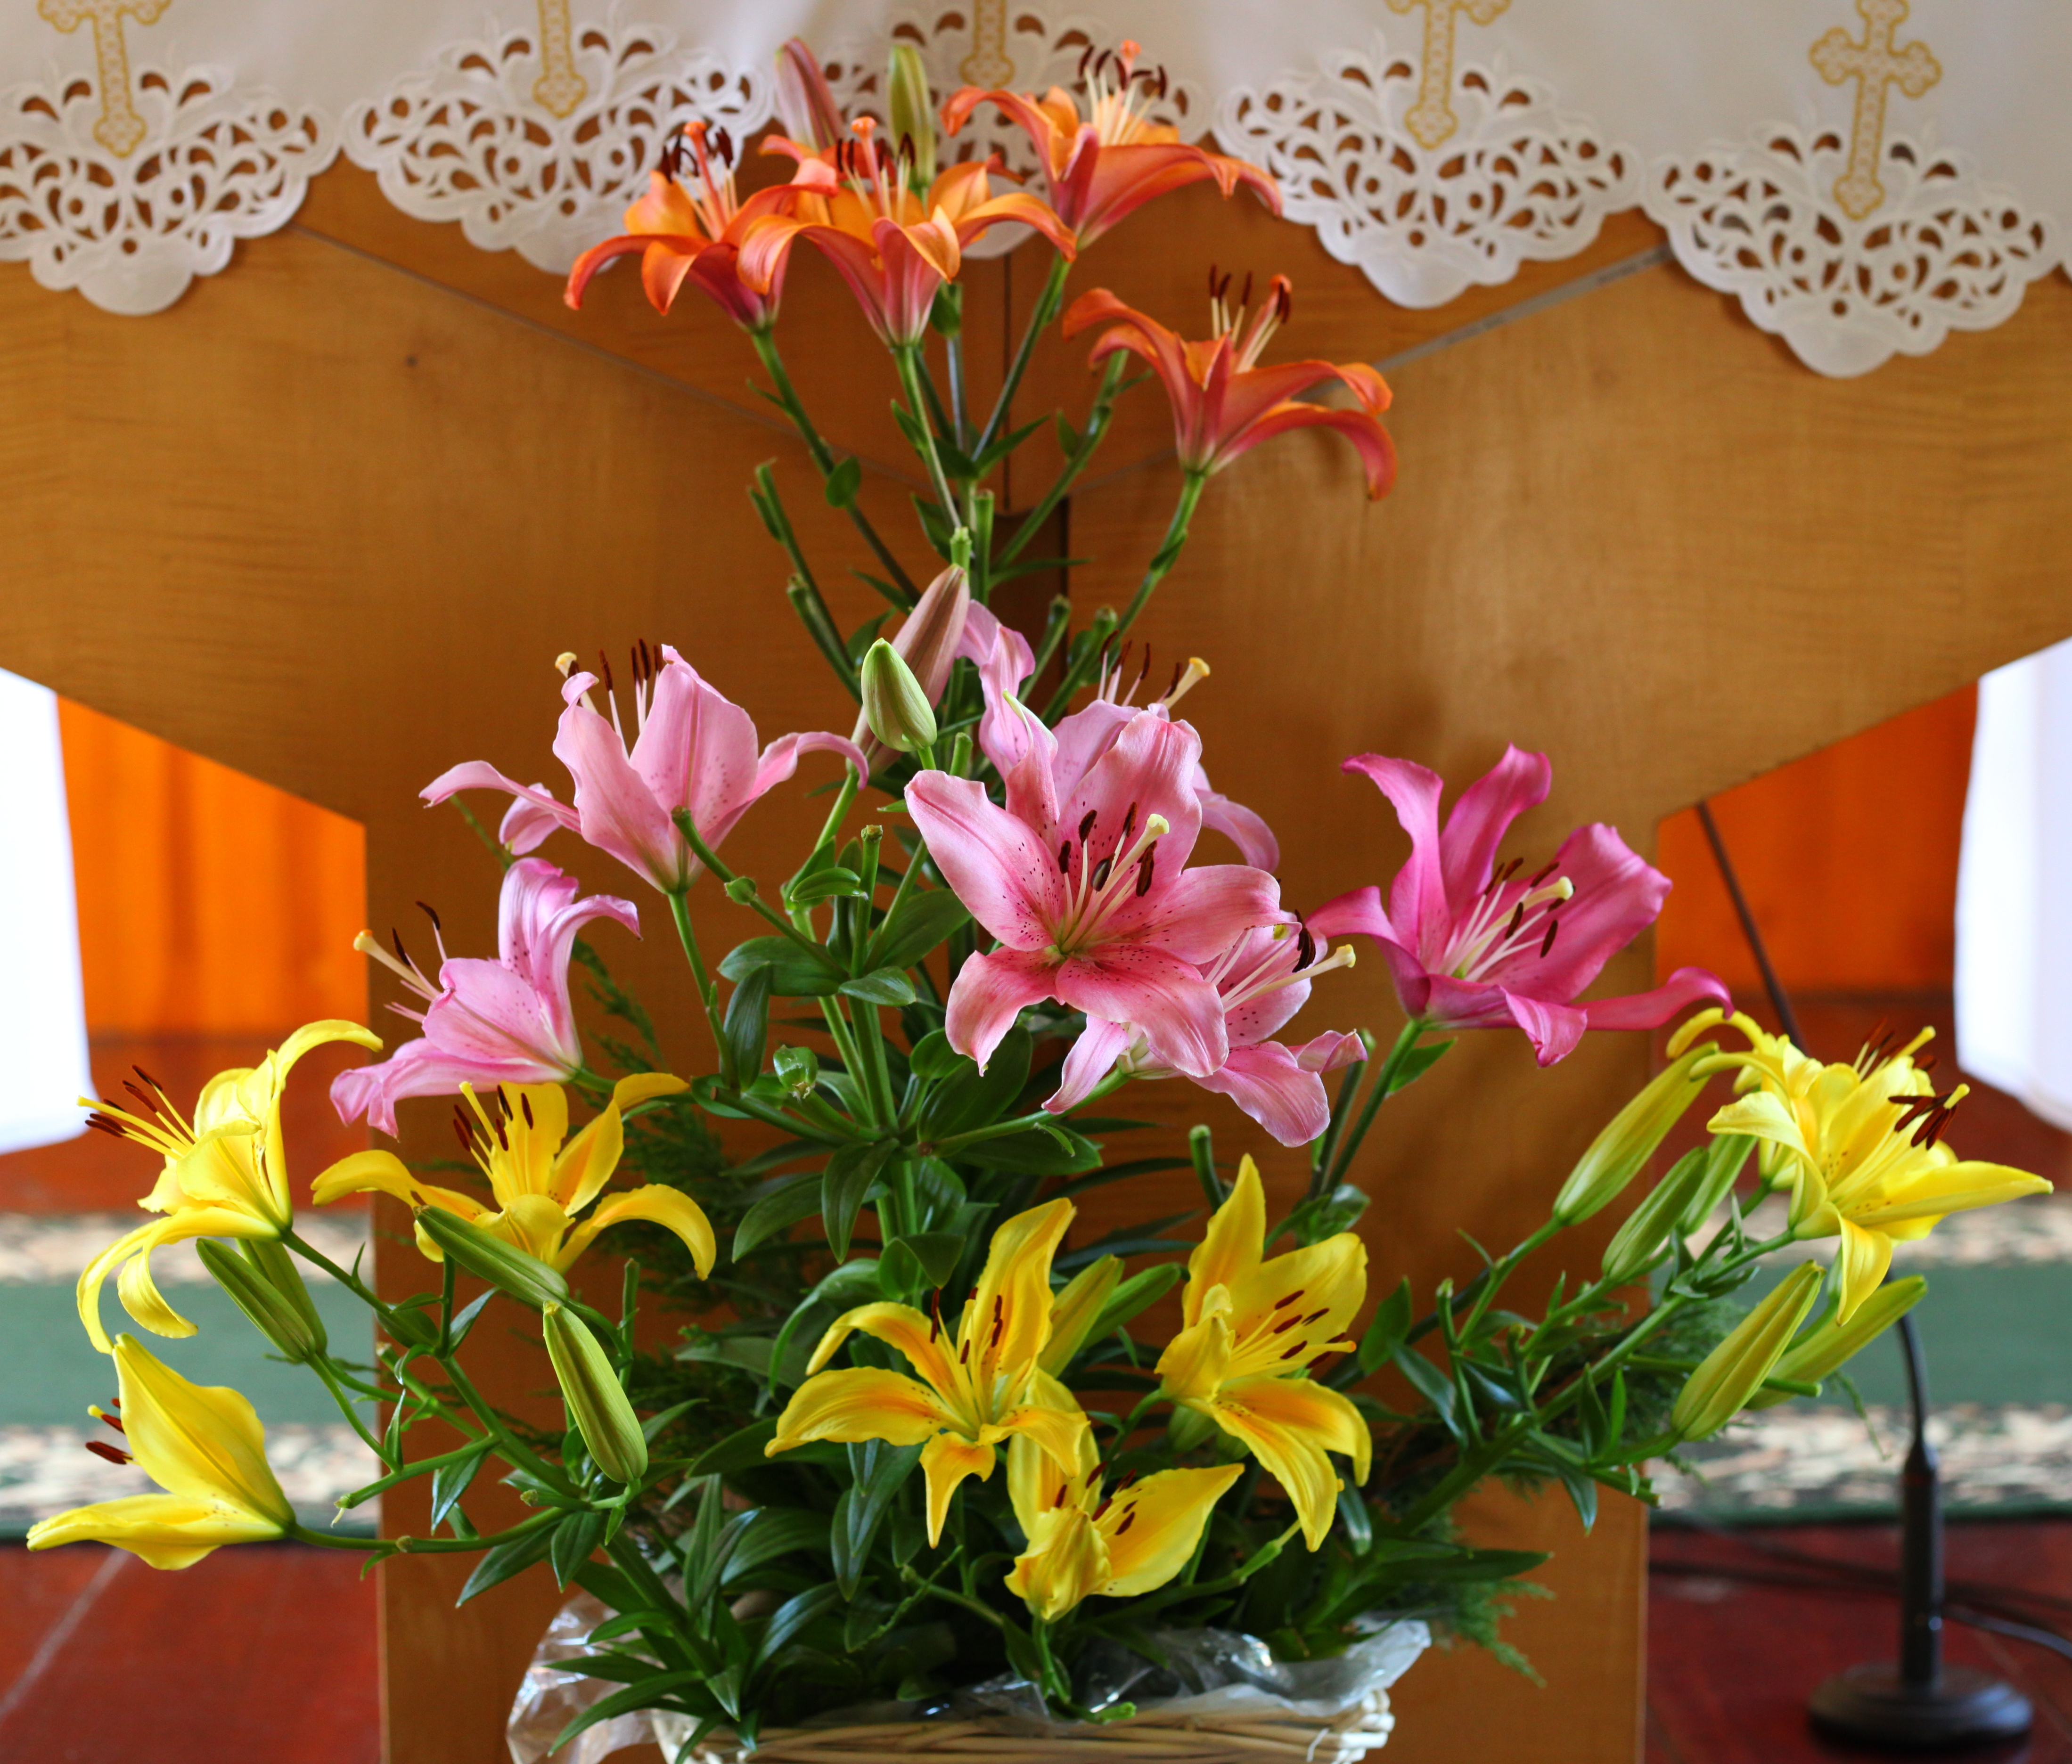 Pink, yellow and orange lily flowers